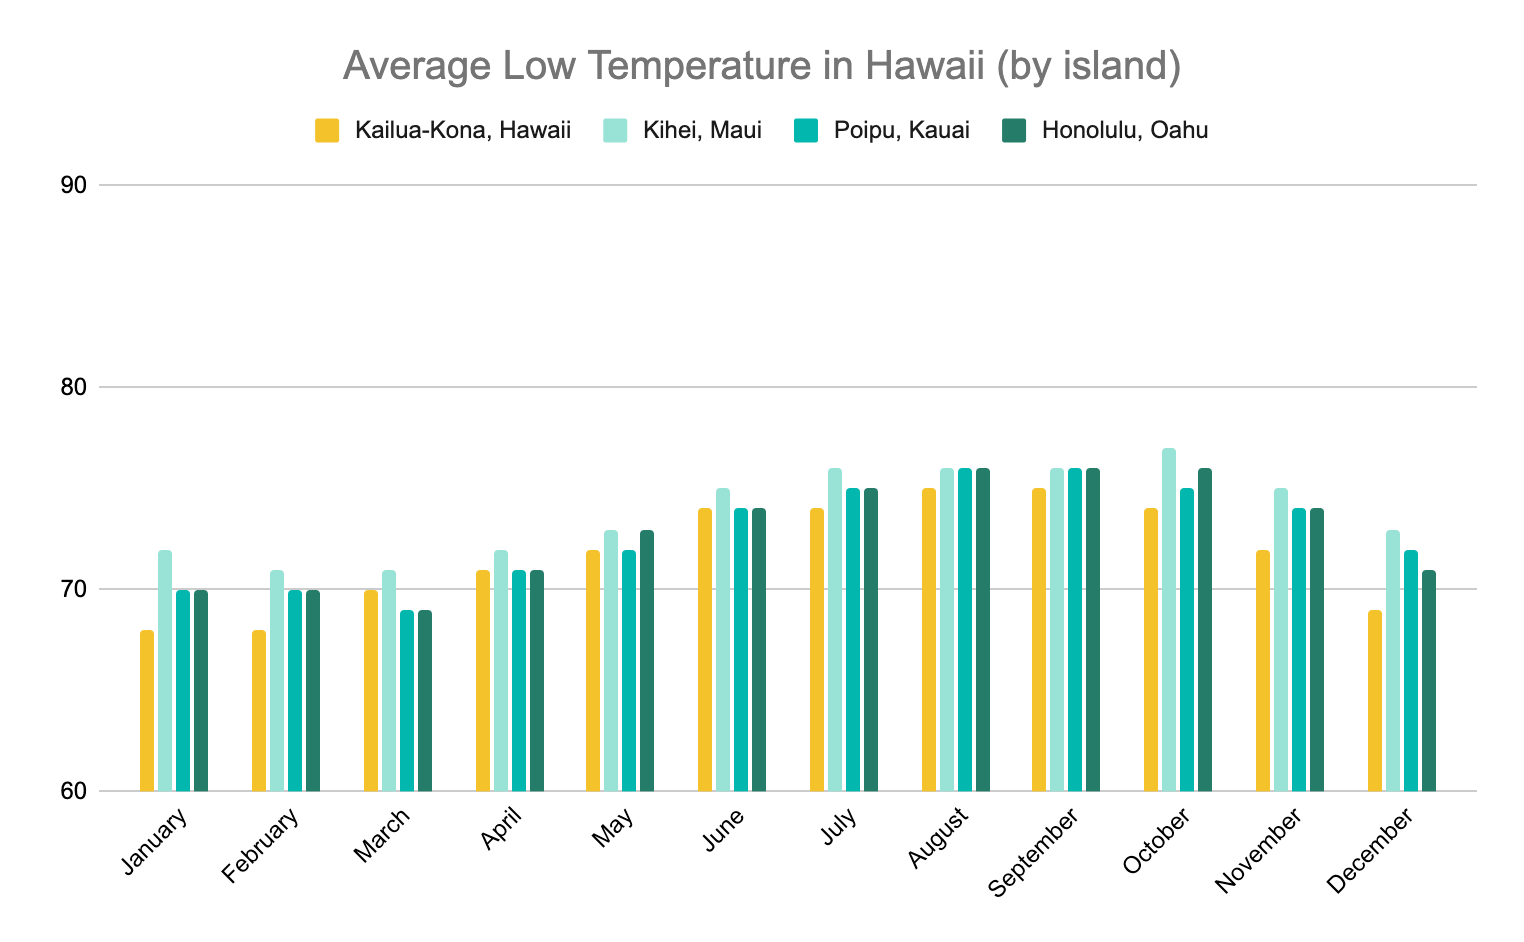 Hawaii in August - average low temperature (F) from the high 60s January to April, peaking at the mid 70s in August and September.